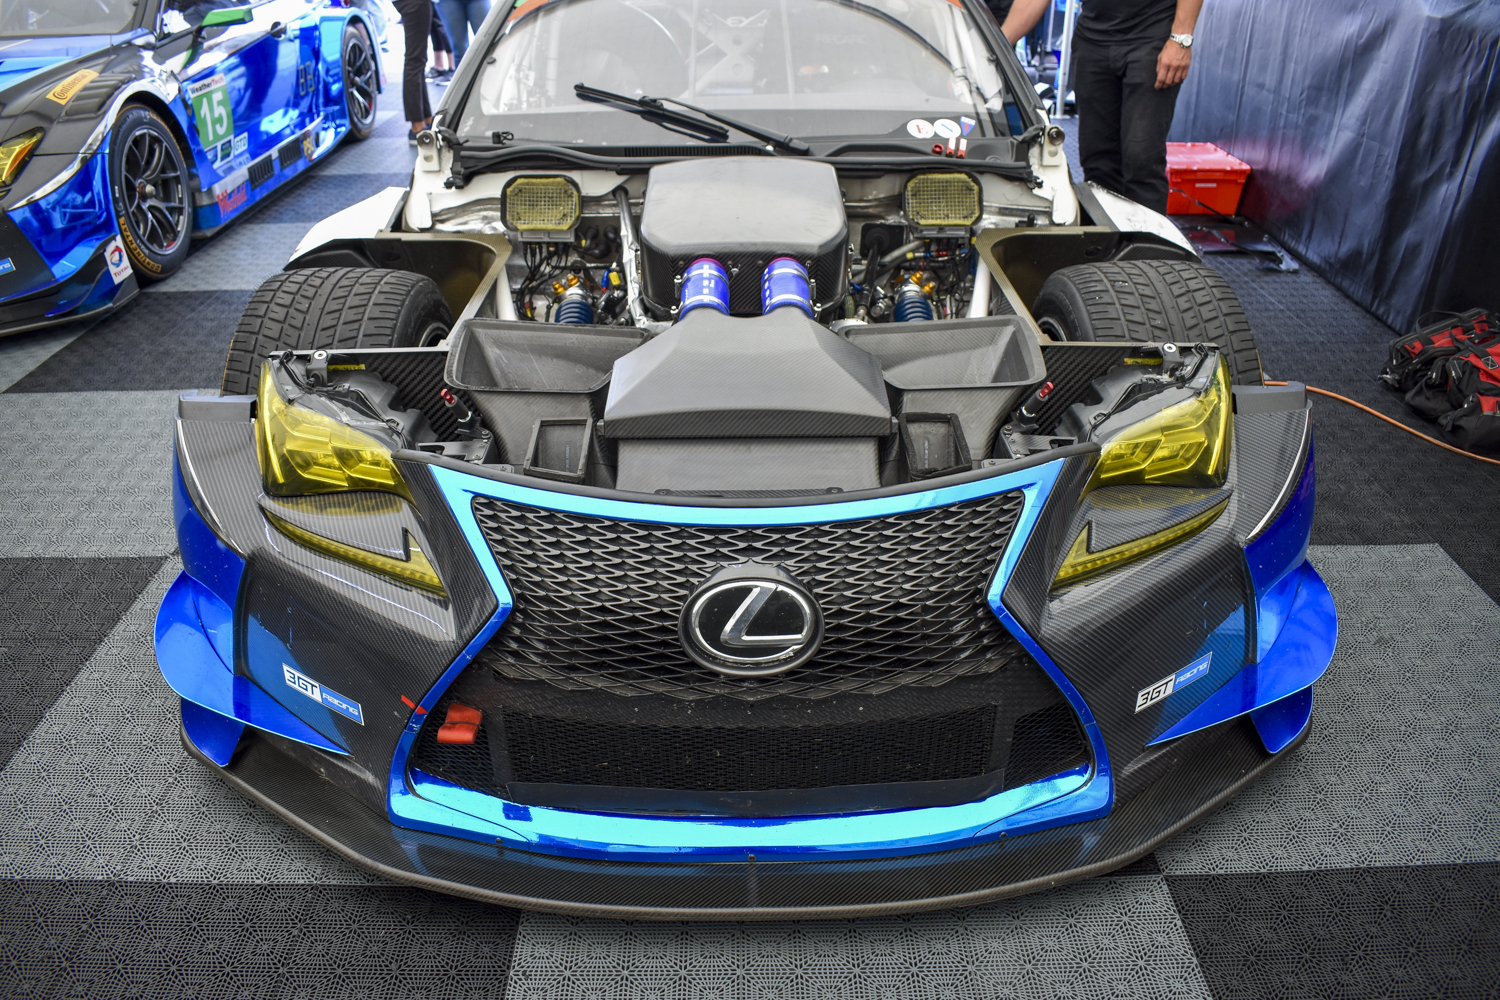 Close-up of the engine and front side for the Lexus RC F GT3